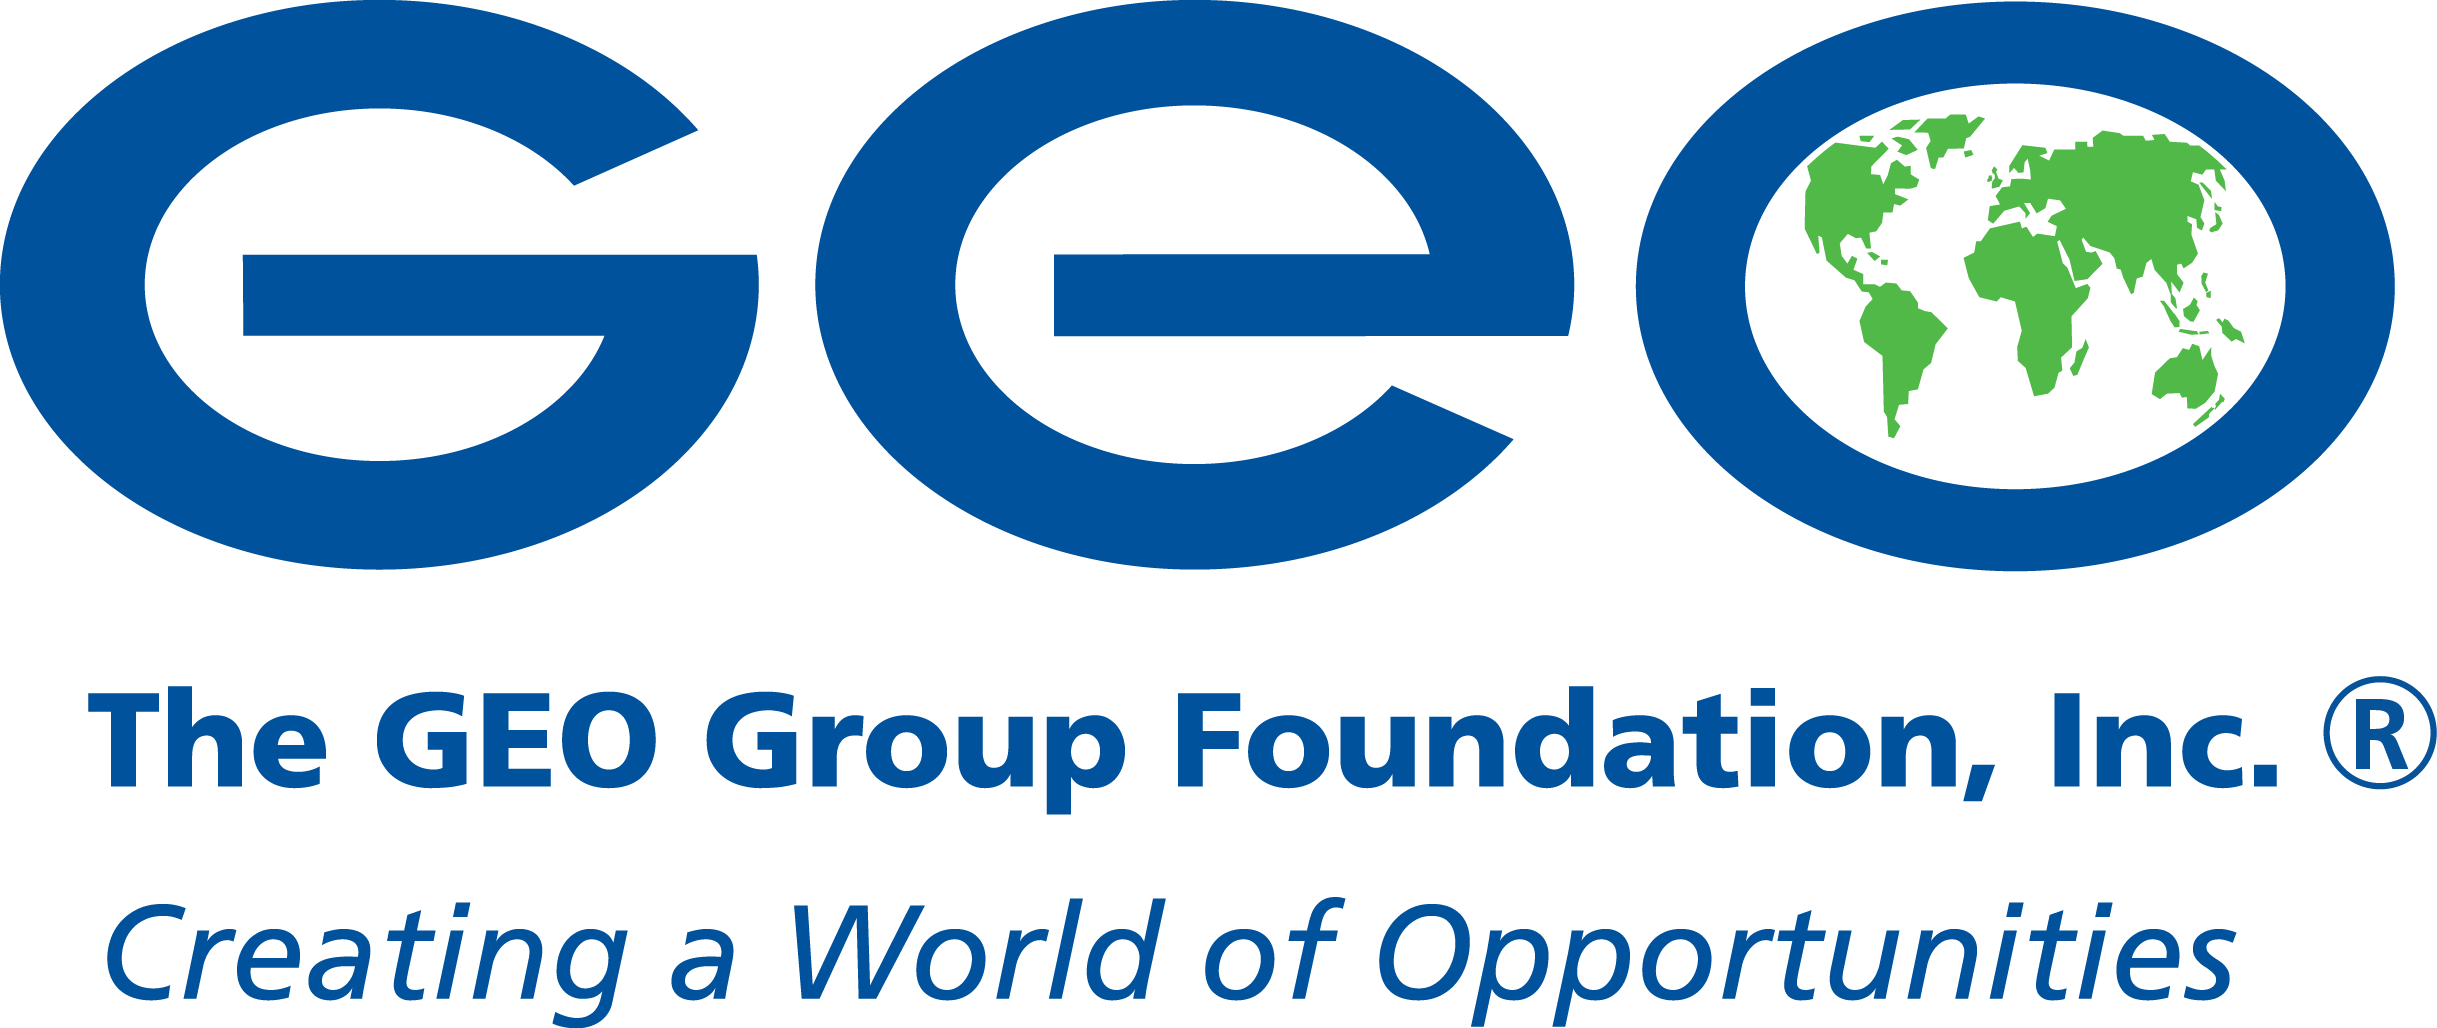 e. GEO Group Foundation (Finish Line and Thank You Brigade)